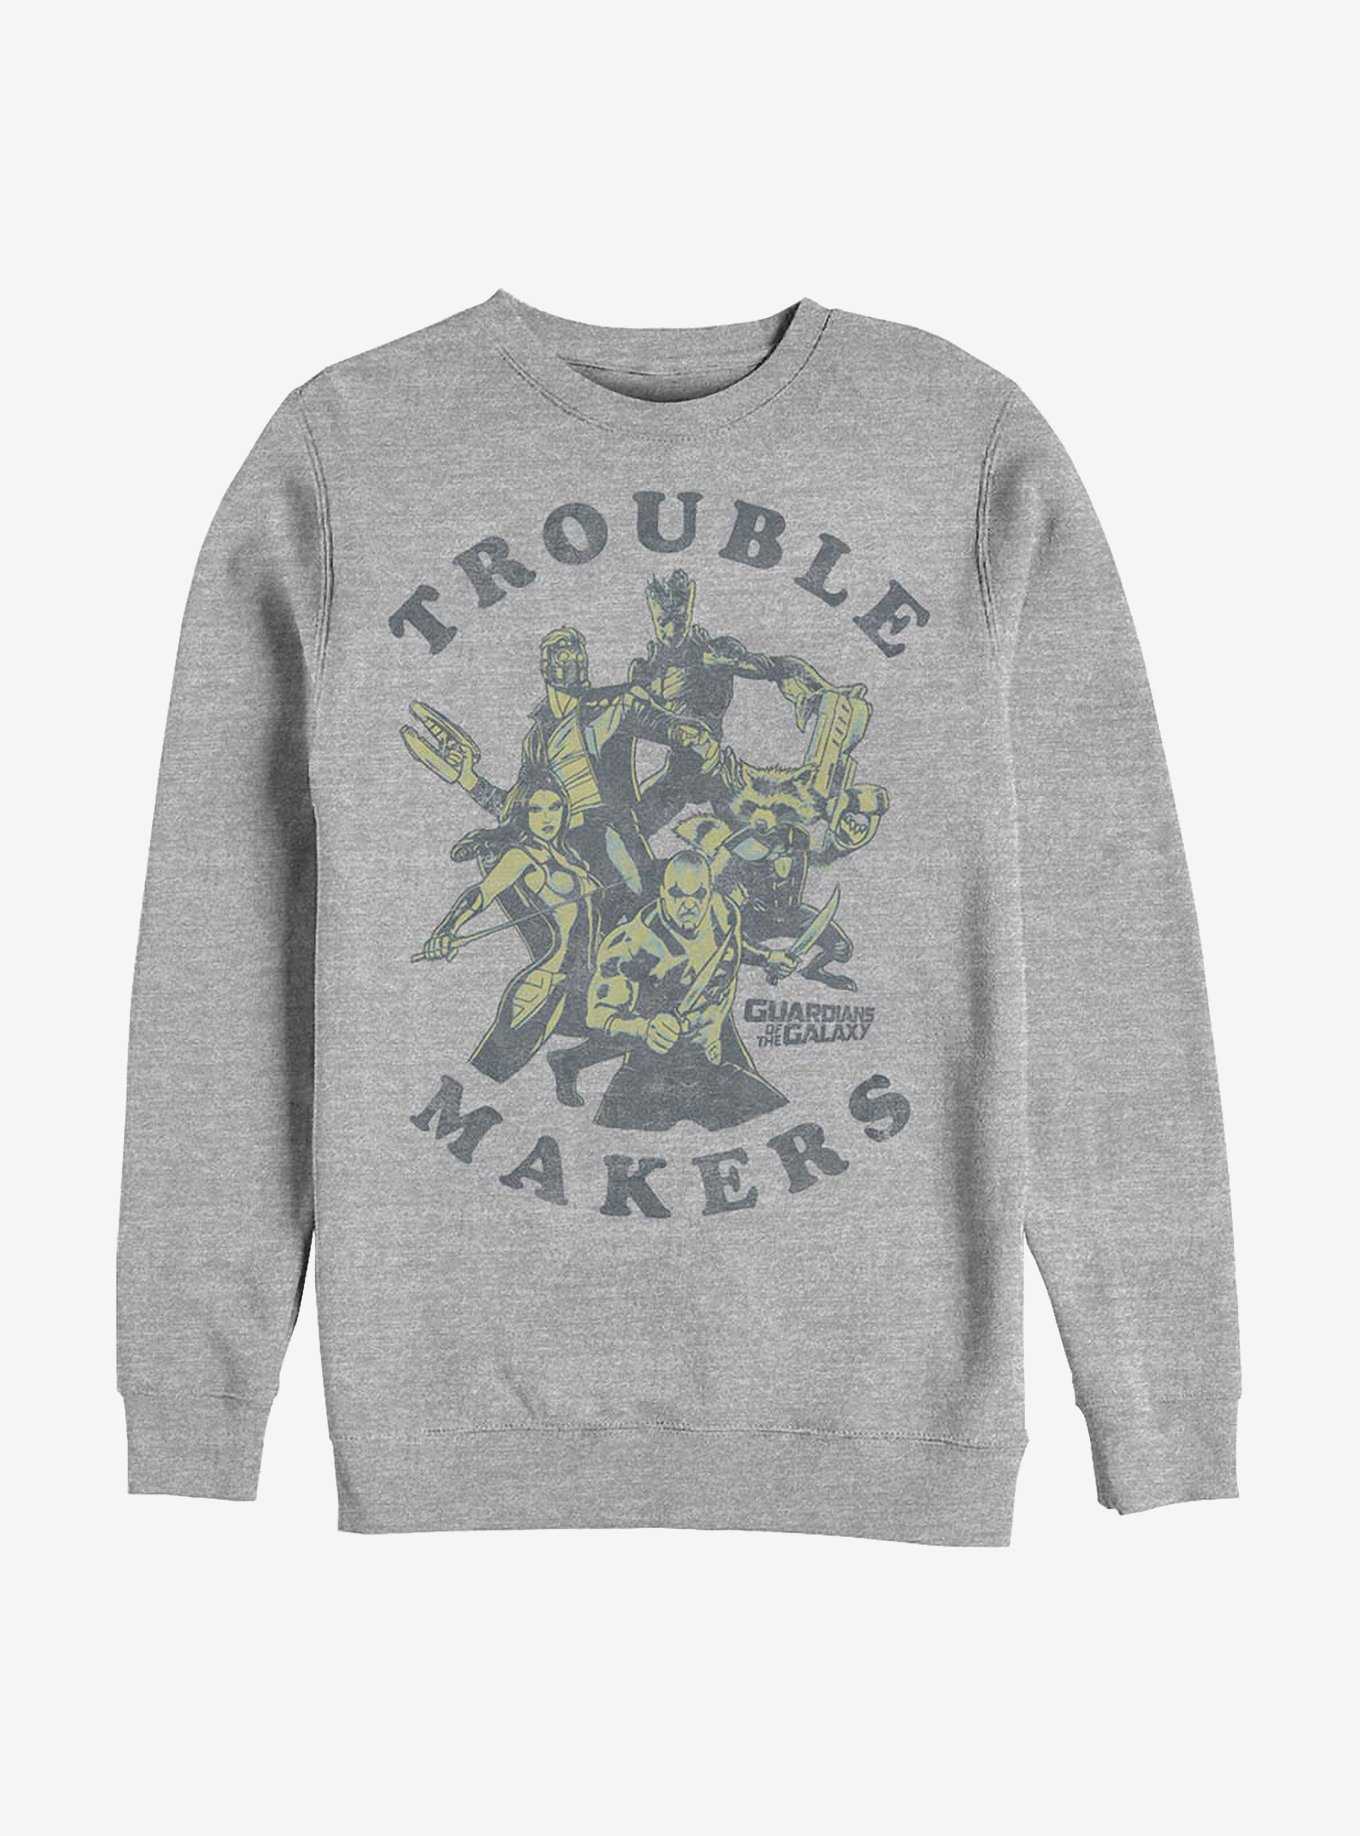 Marvel Guardians Of The Galaxy Trouble Makers Crew Sweatshirt, , hi-res